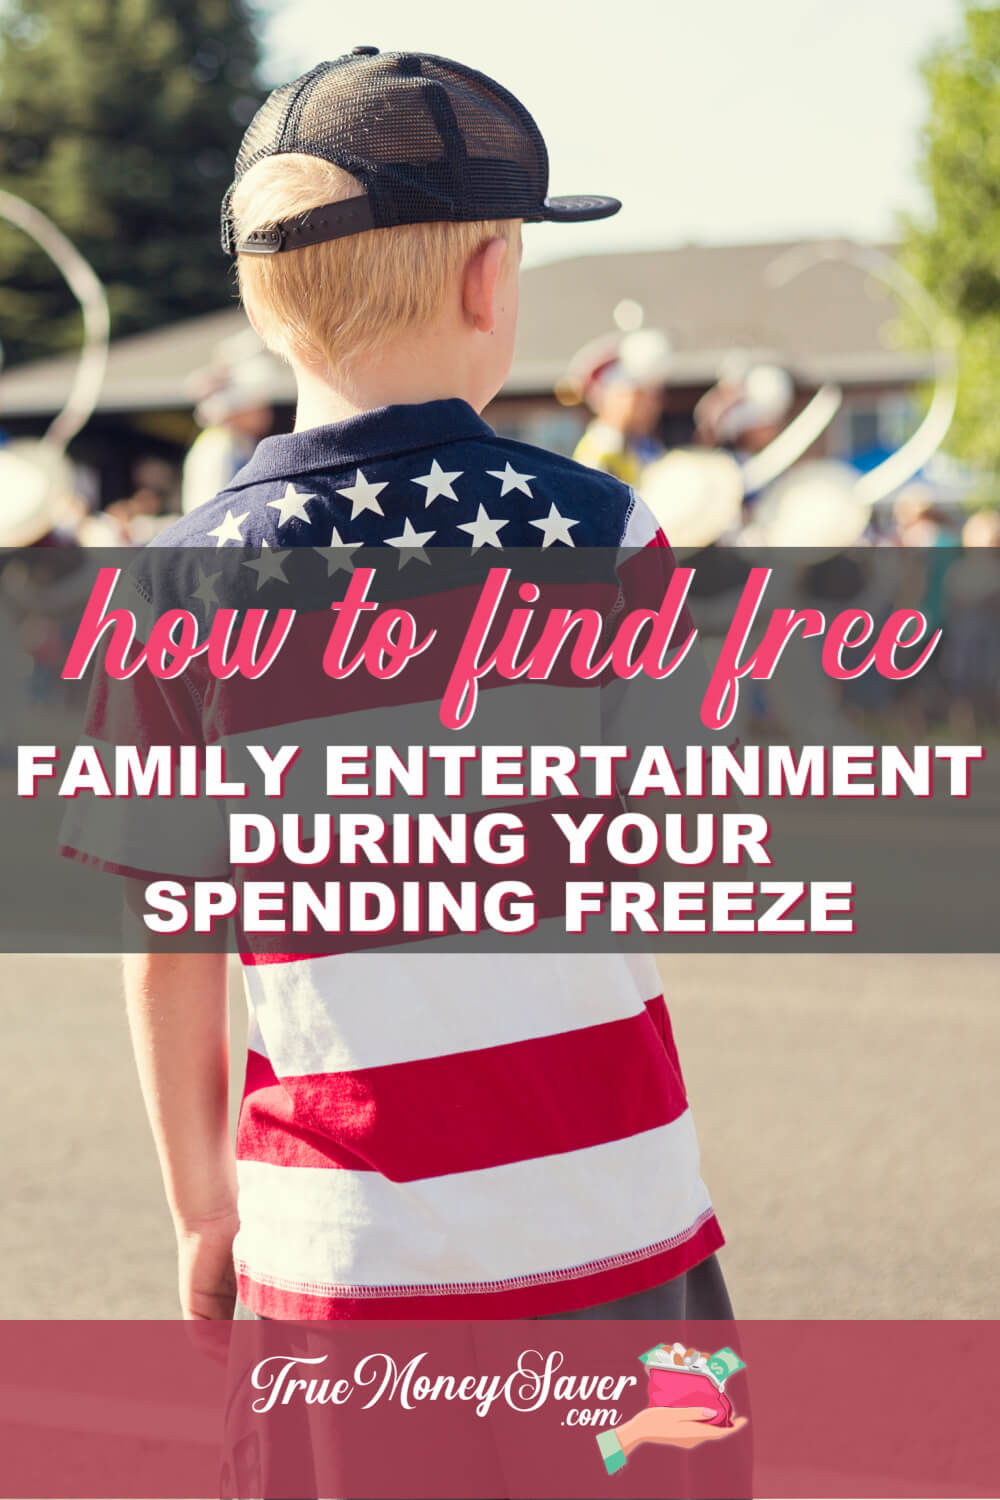 How To Find The Best Free Family Entertainment During Your Spending Freeze